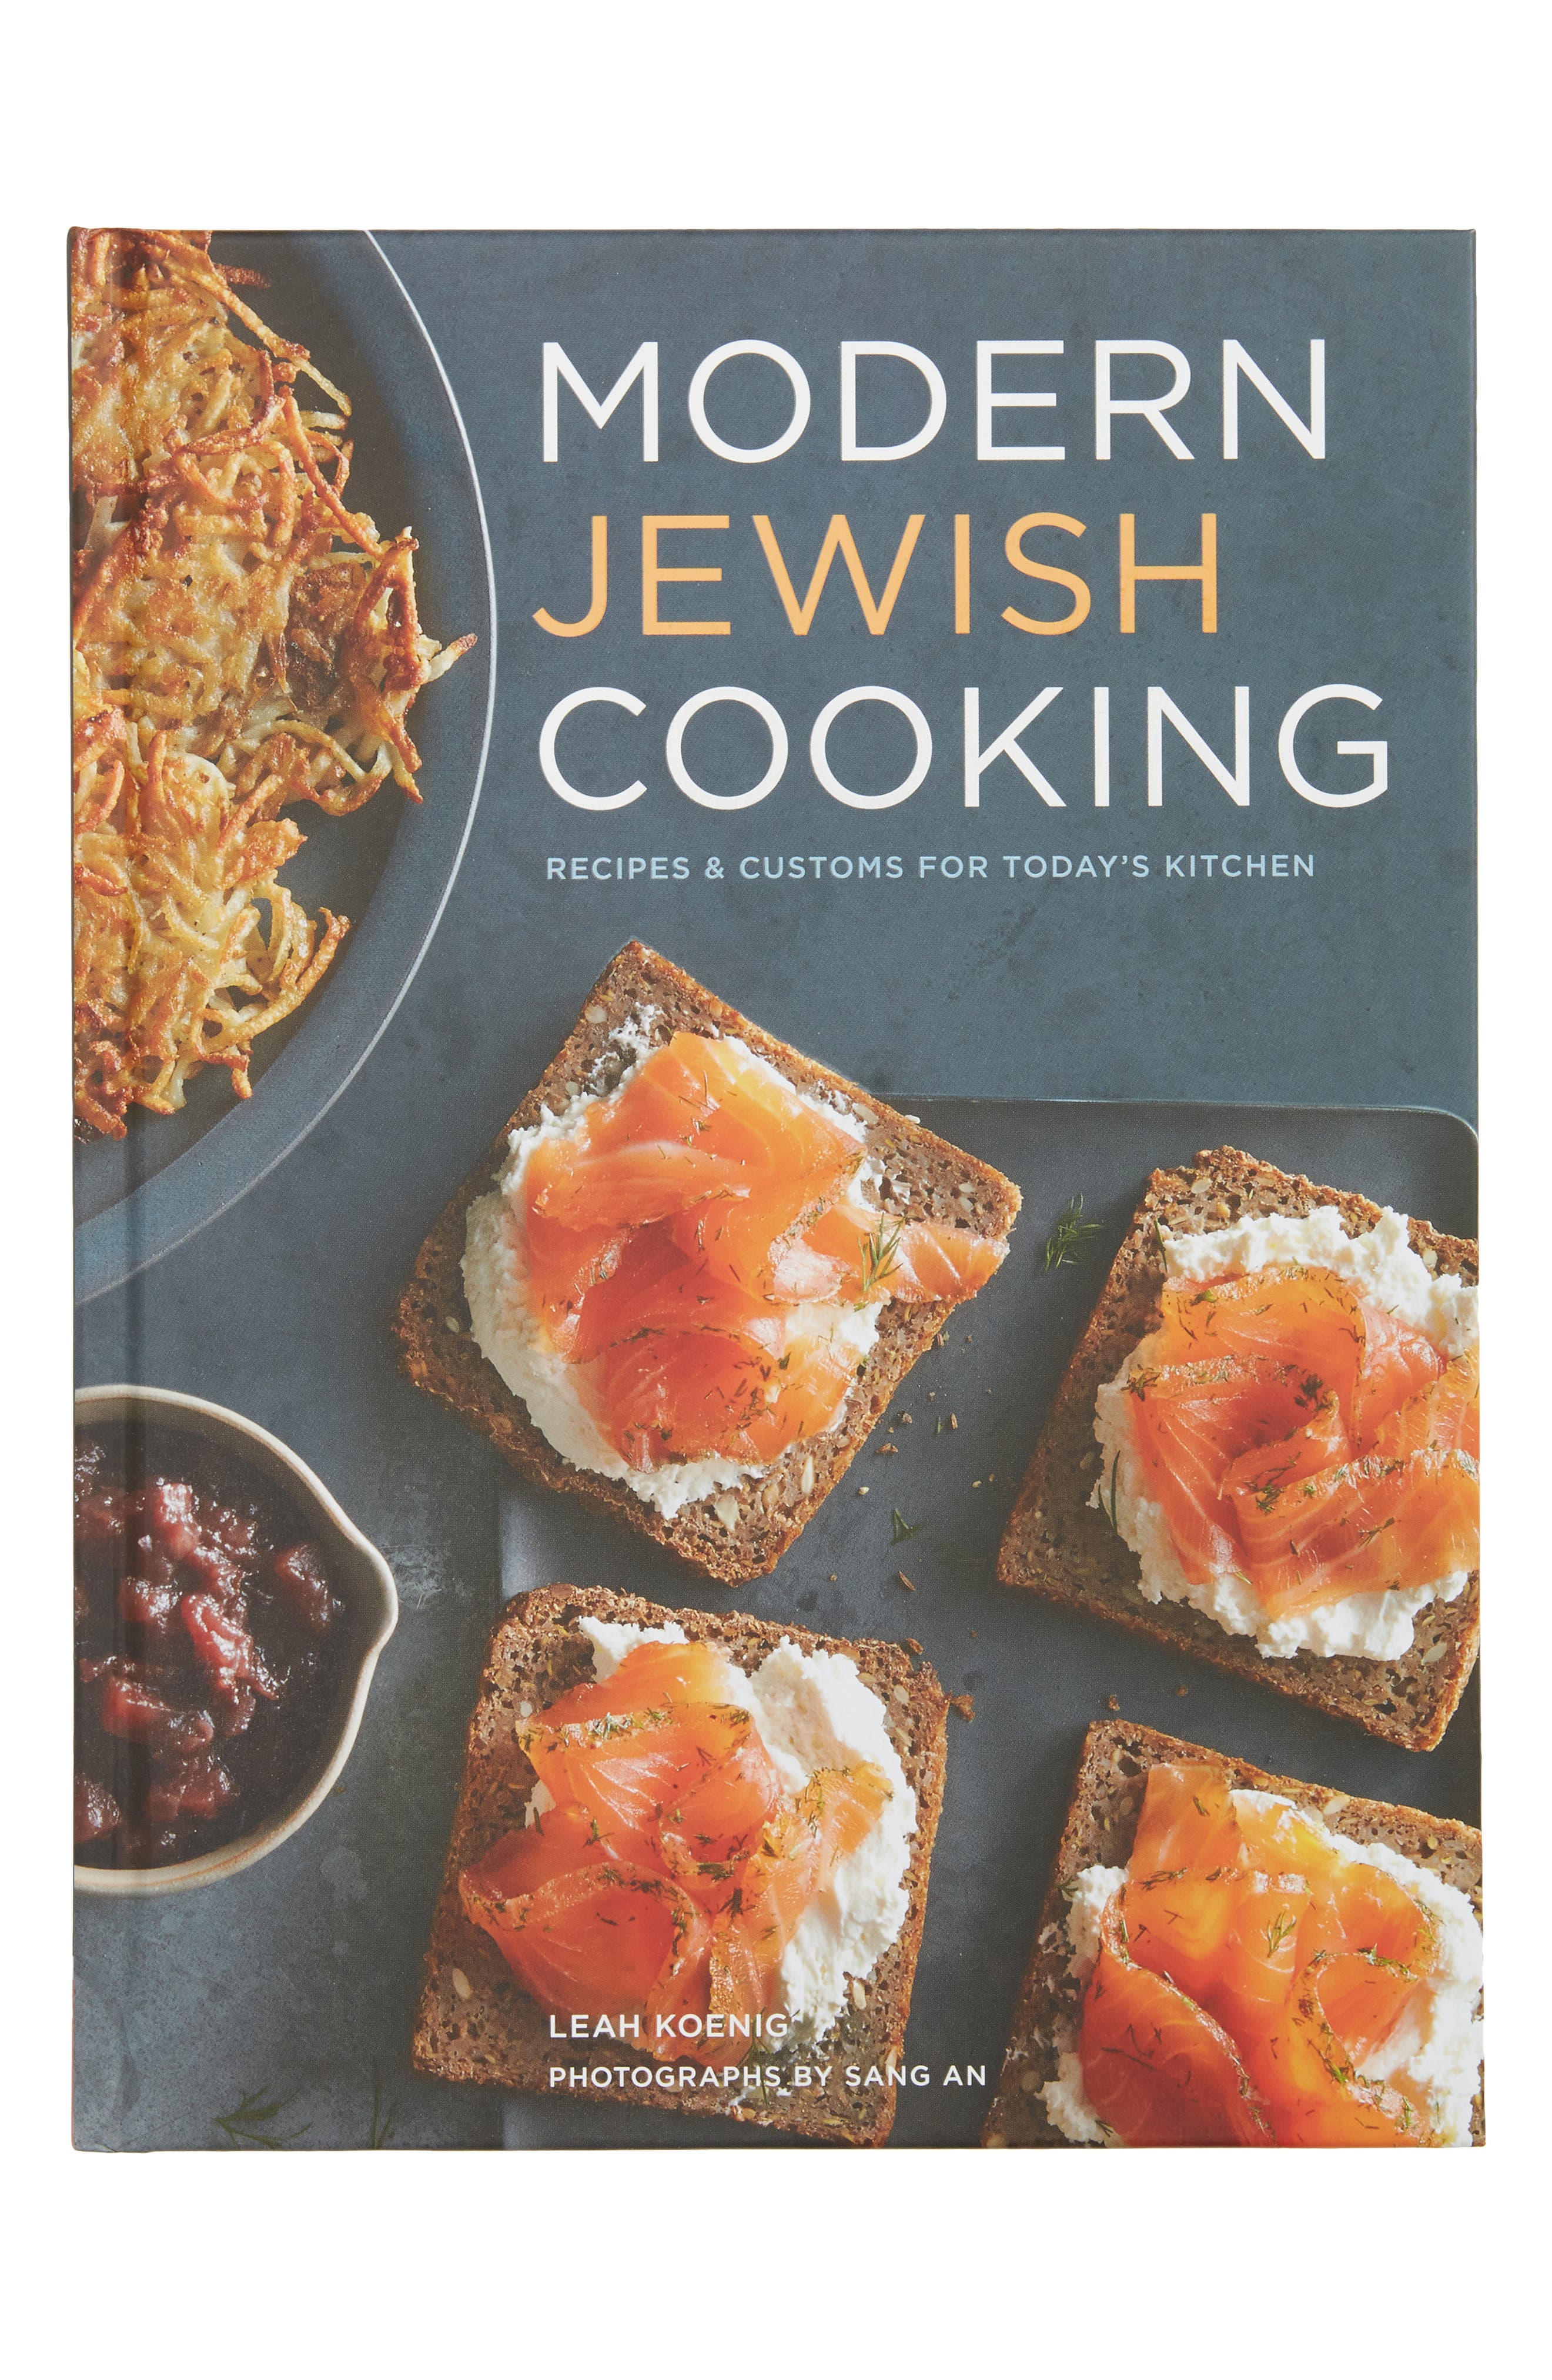 ISBN 9781452127484 product image for Chronicle Books 'Modern Jewish Cooking' Cookbook in Multi at Nordstrom | upcitemdb.com